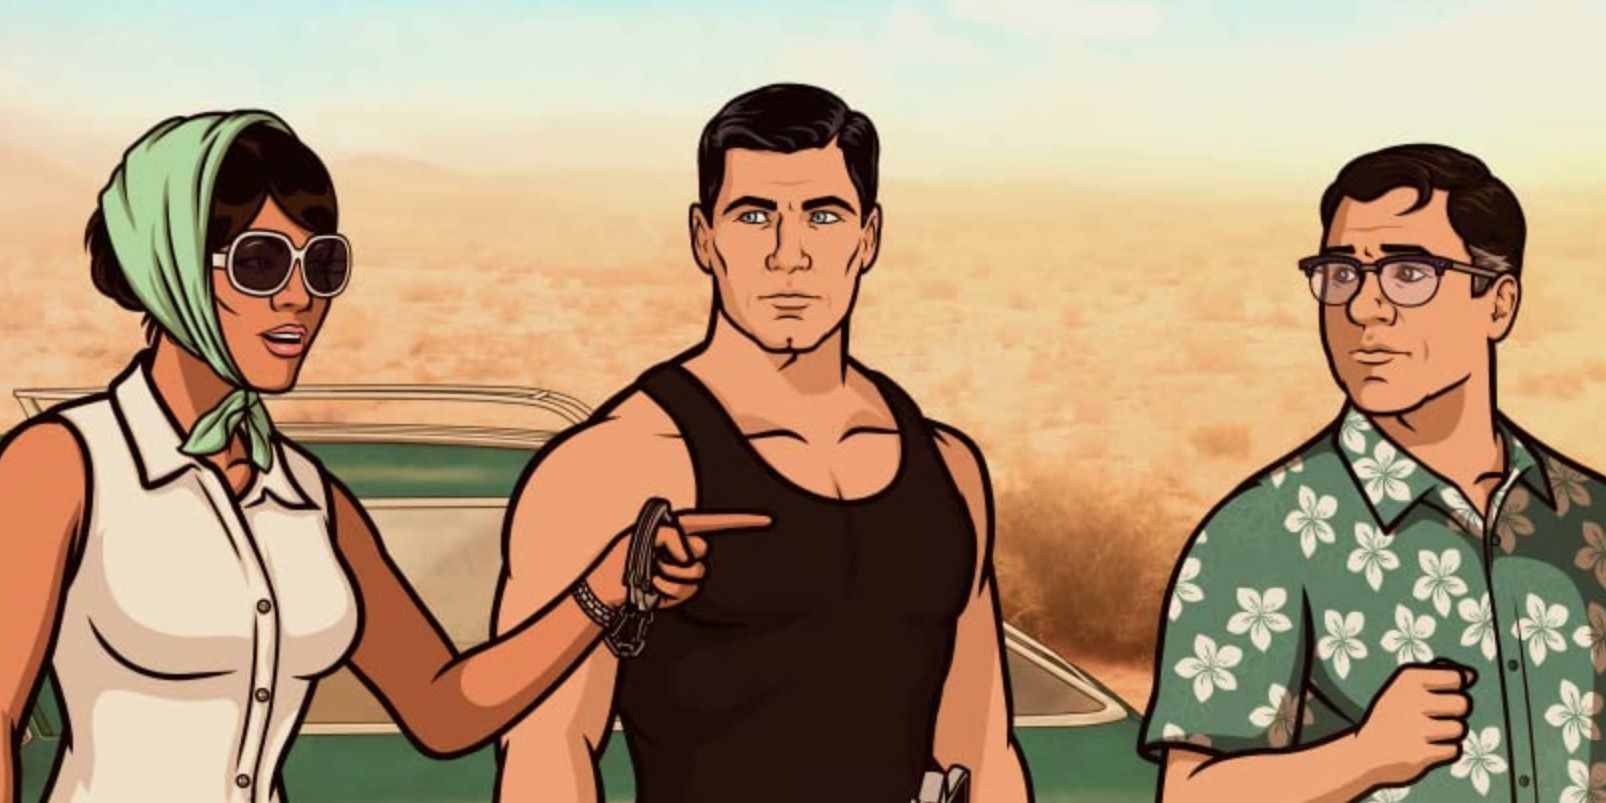 H. Jon Benjamin voiced Sterling Archer, a woman and a man in Archer